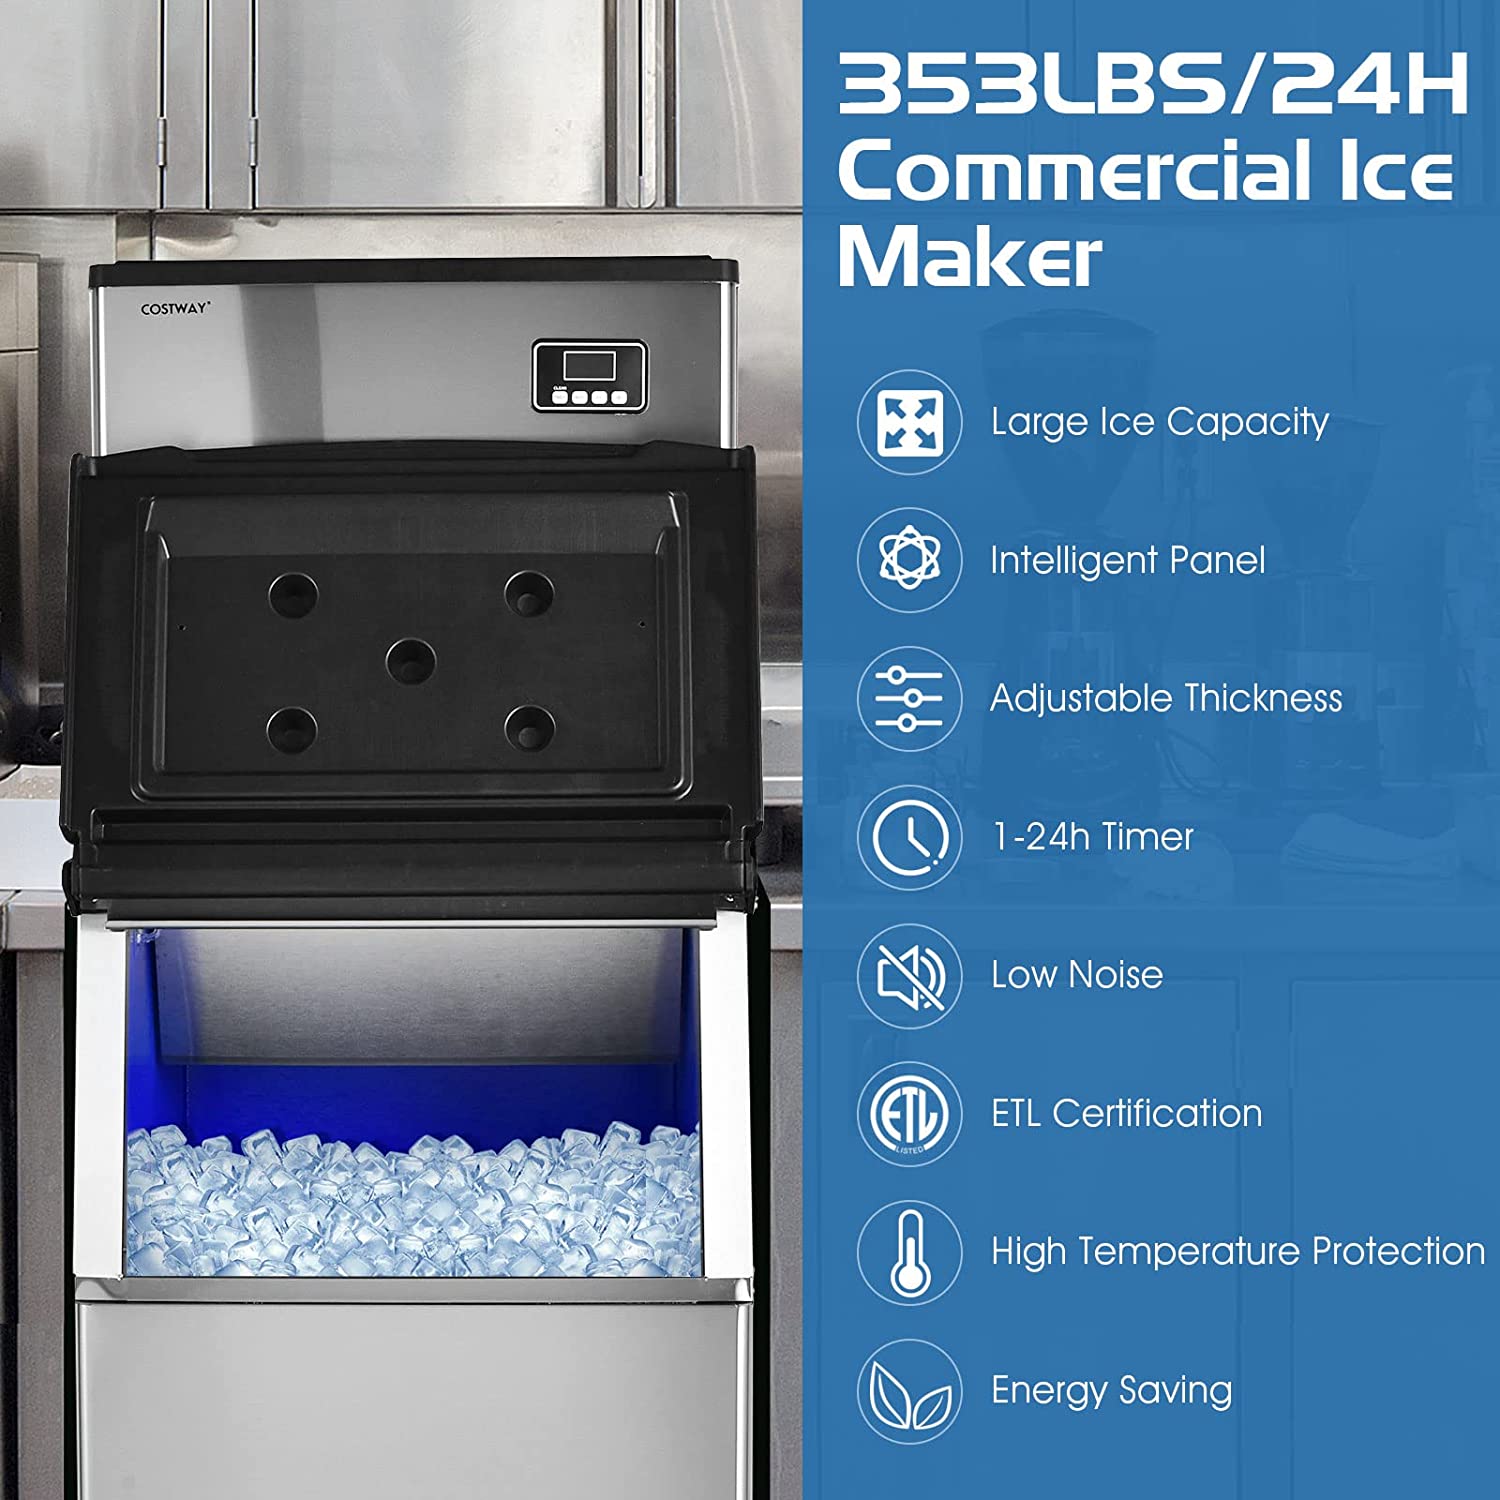 353LBS/24H Split Commercial Ice Maker Full-Automatic Vertical Industrial Modular Ice Machine with 198 LBS Storage Bin